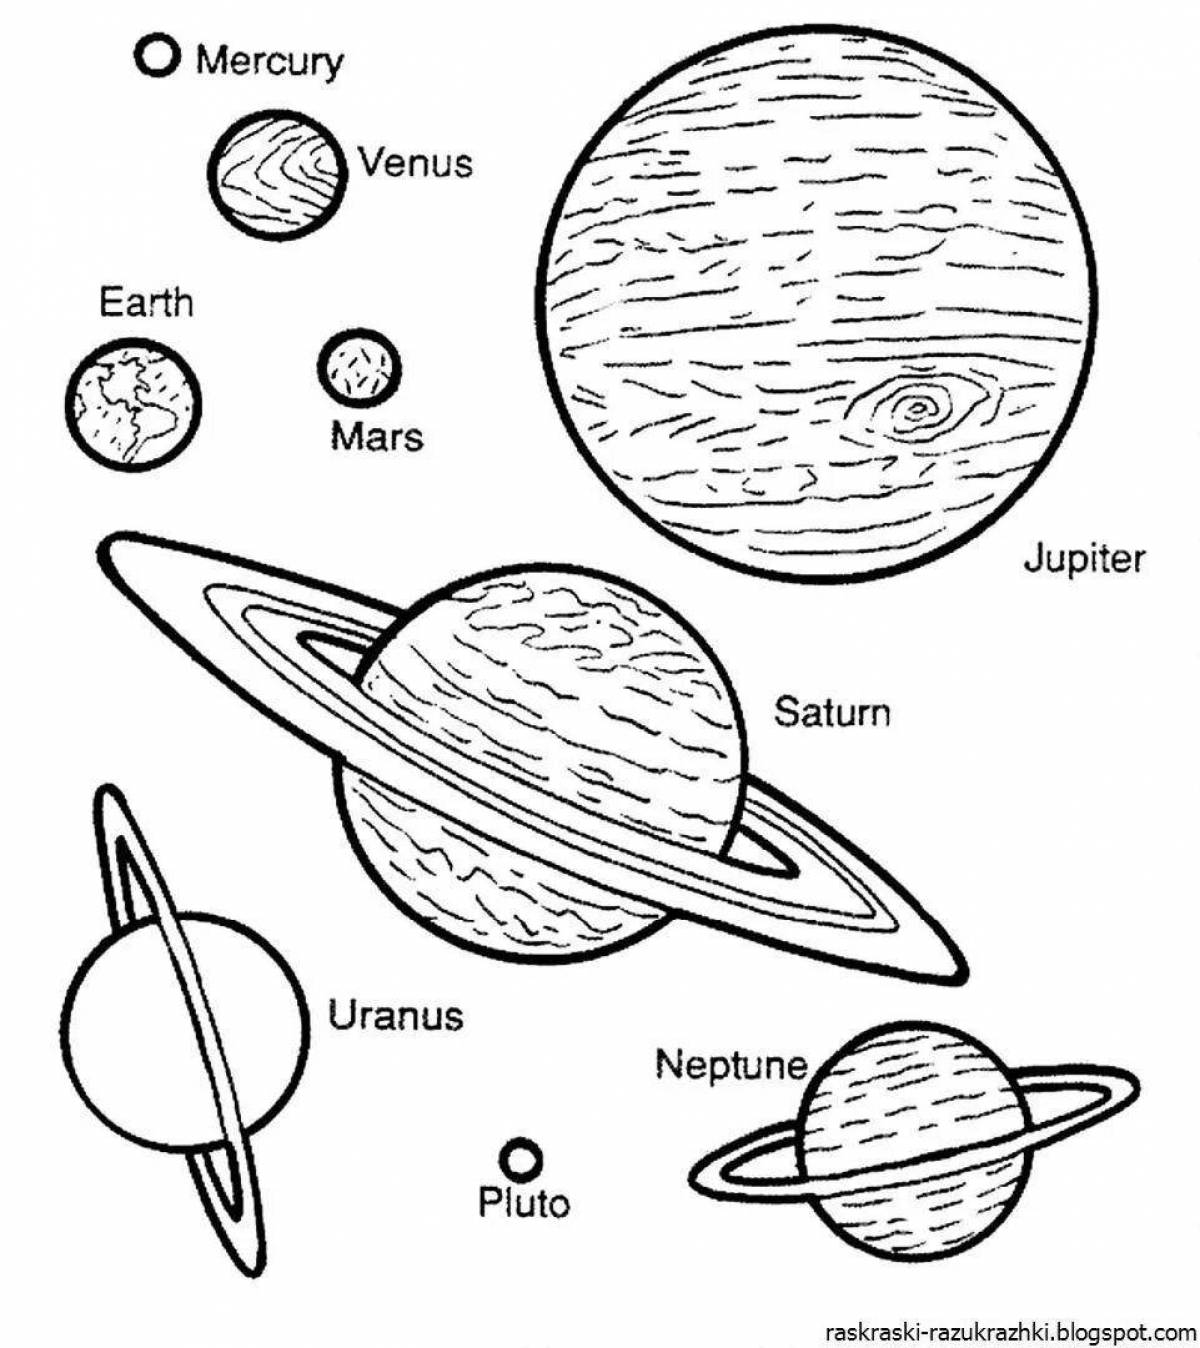 Colorful coloring of planets in the solar system